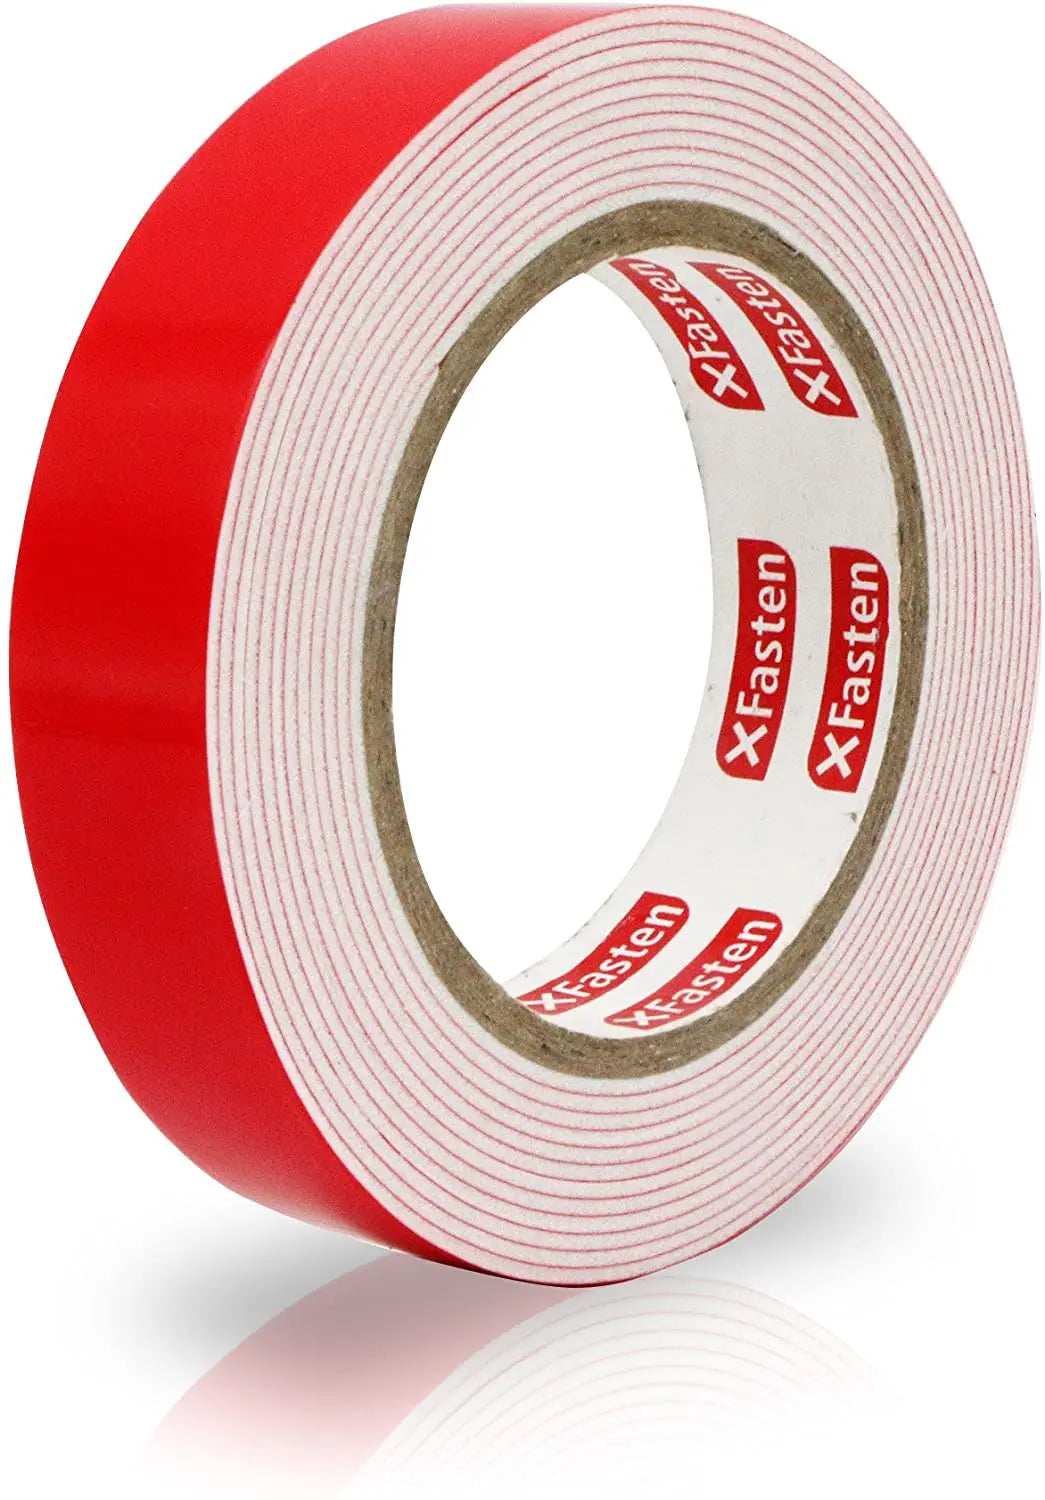 Foam Strap Double-Sided Adhesive Tape 6" X 1" White Latex-Free - Ea/1